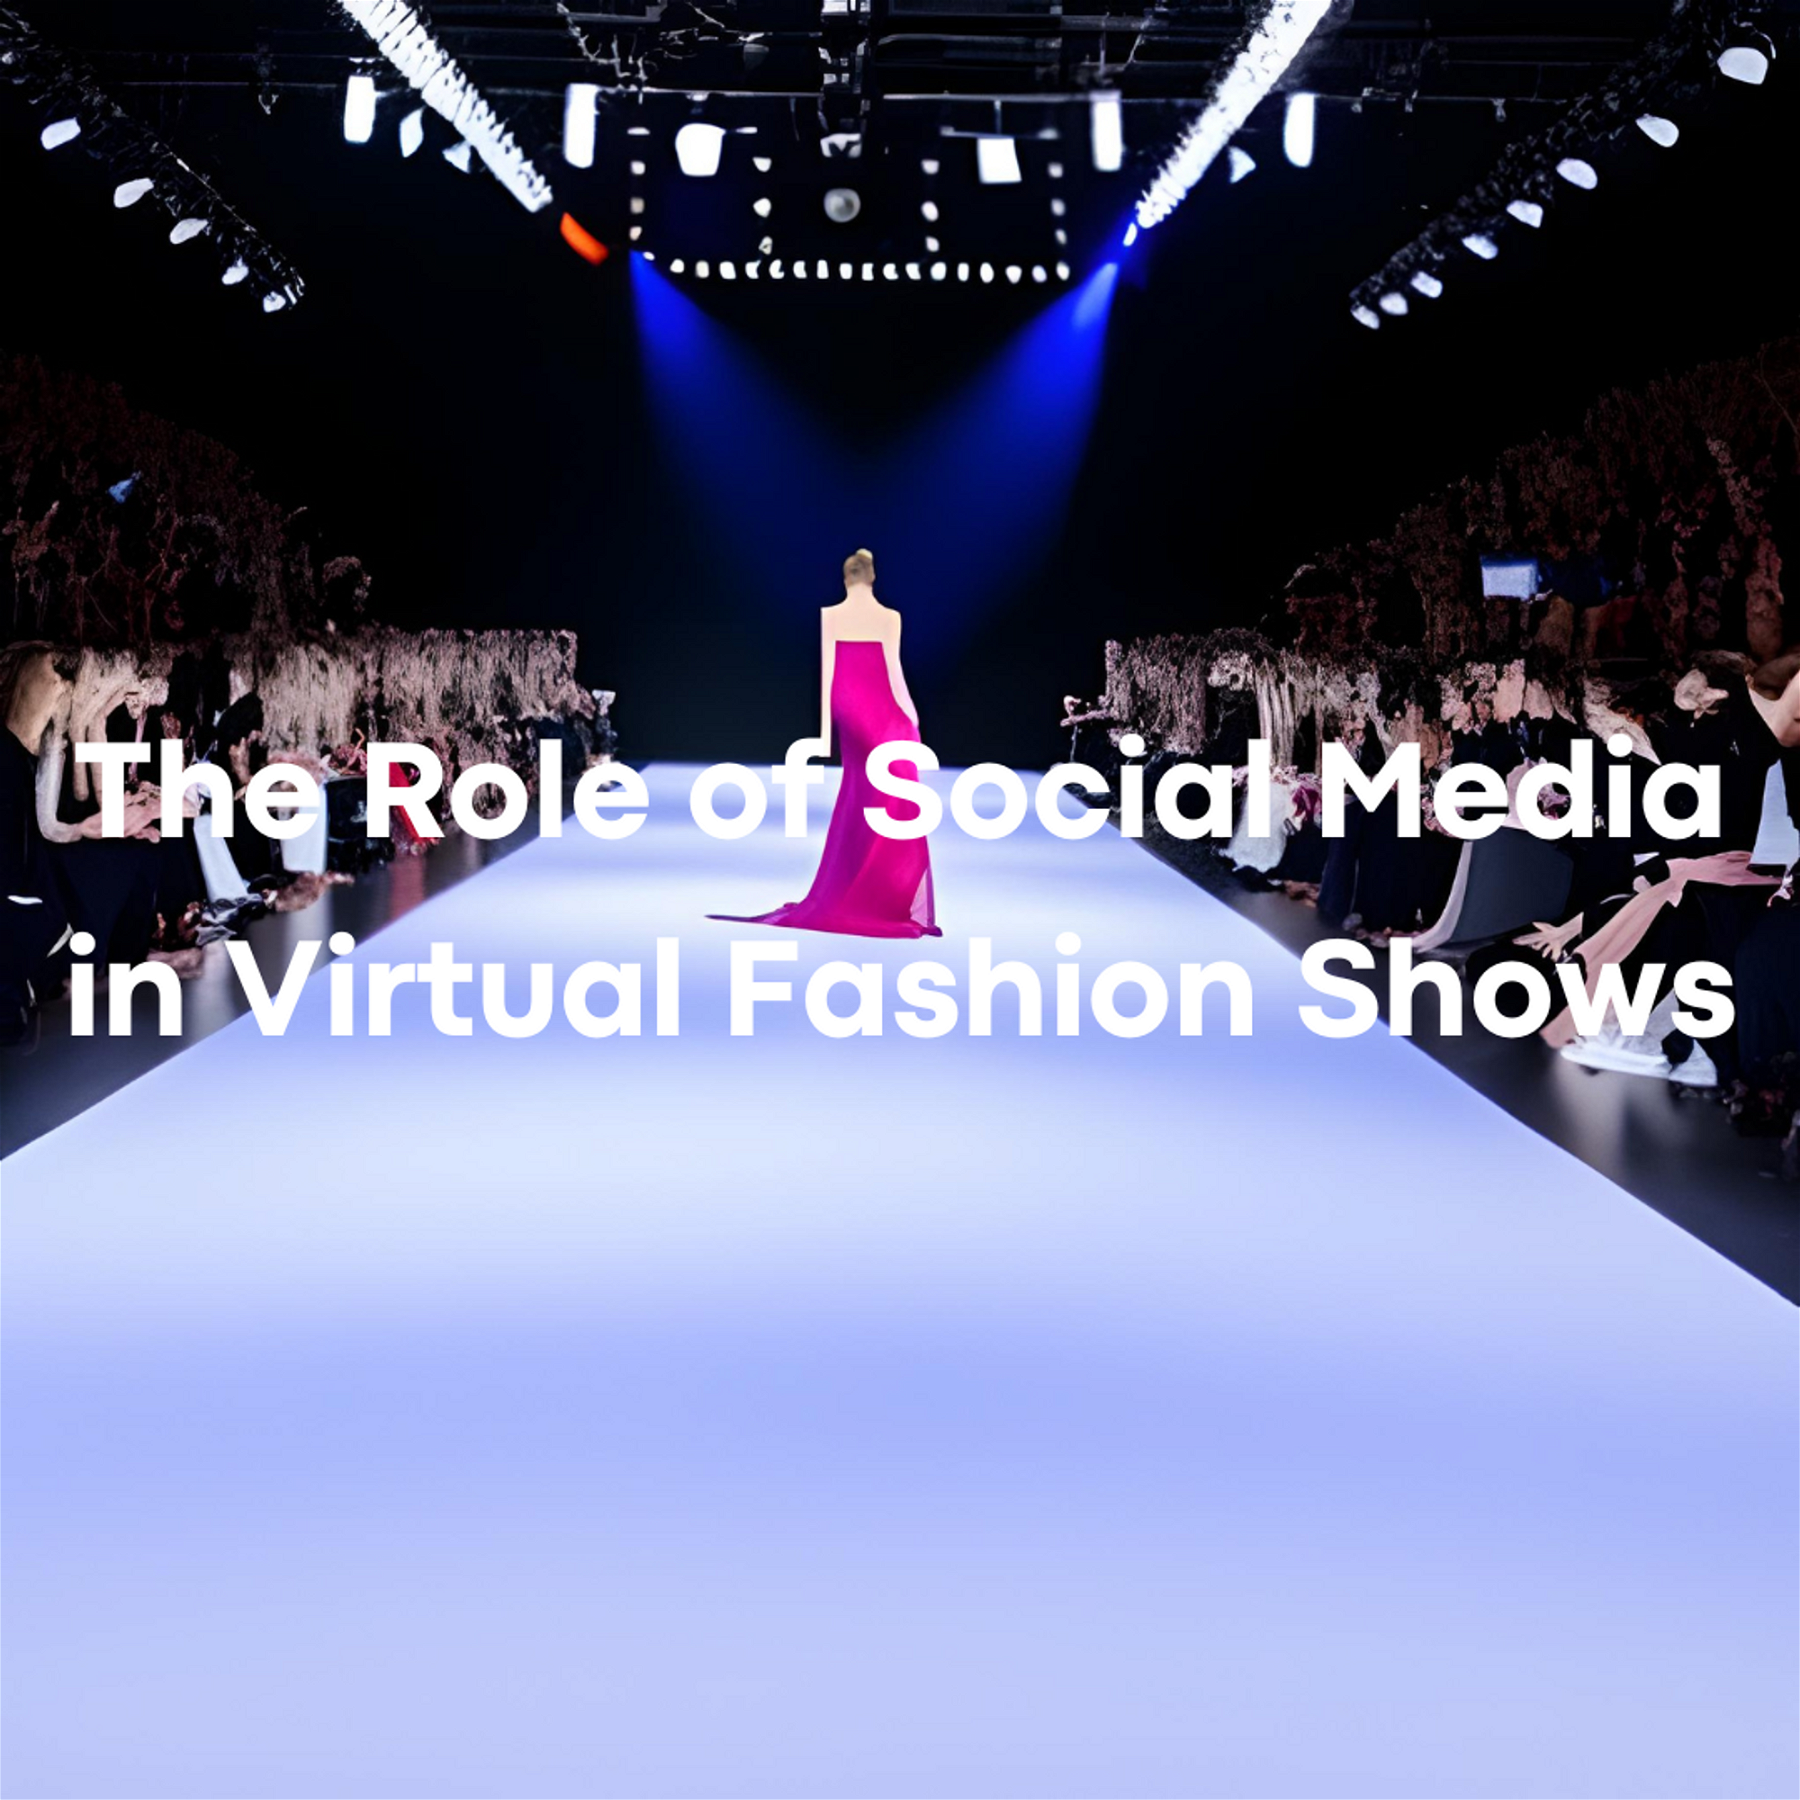 The Role of Social Media in Virtual Fashion Shows